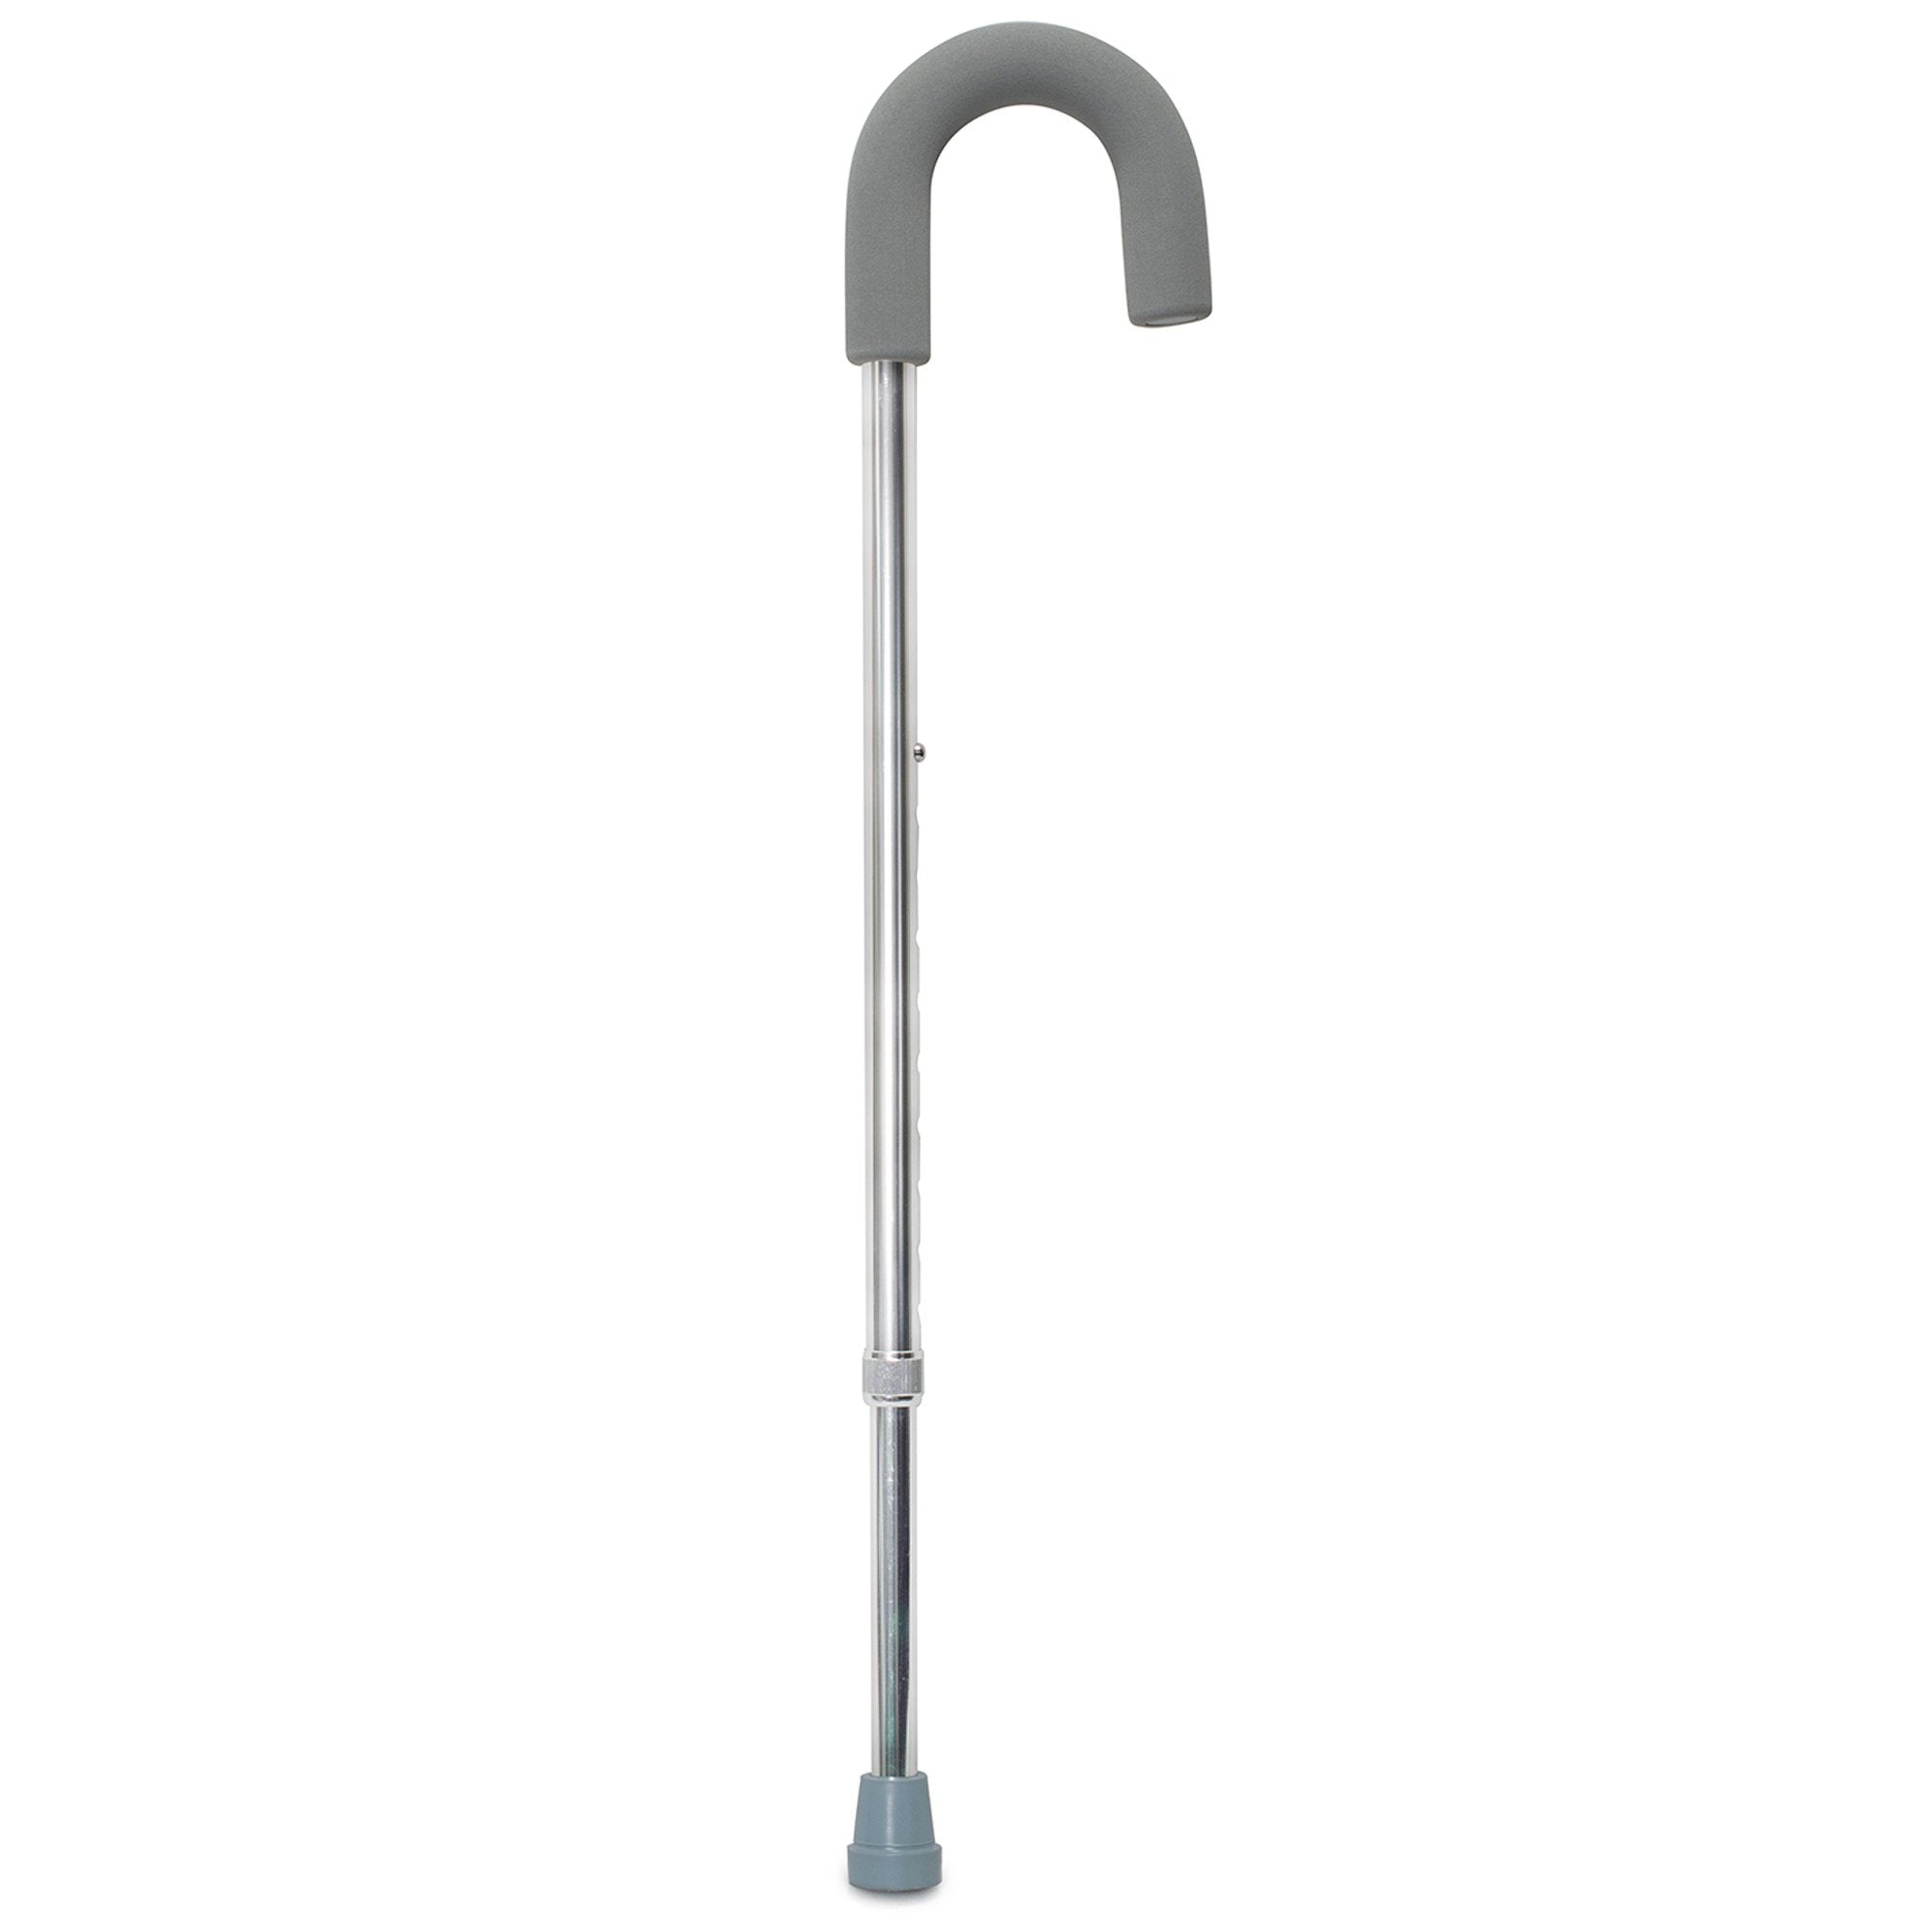 Round Handle Cane McKesson Aluminum 28-3/4 to 37-3/4 Inch Height Silver